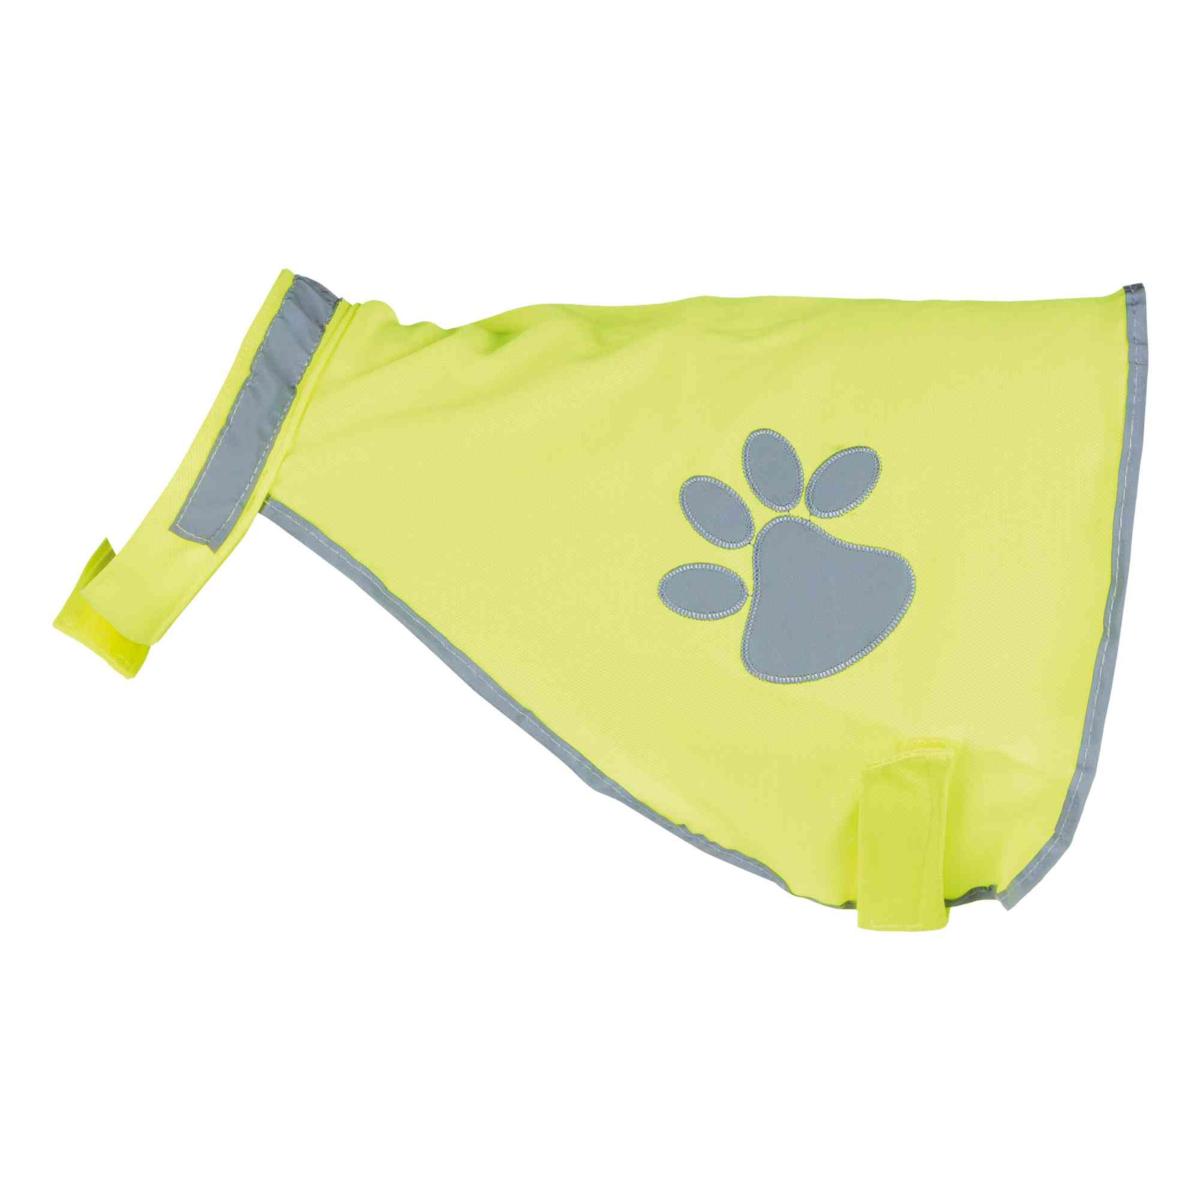 Trixie High Visibility Reflective Safety Vest for Dogs